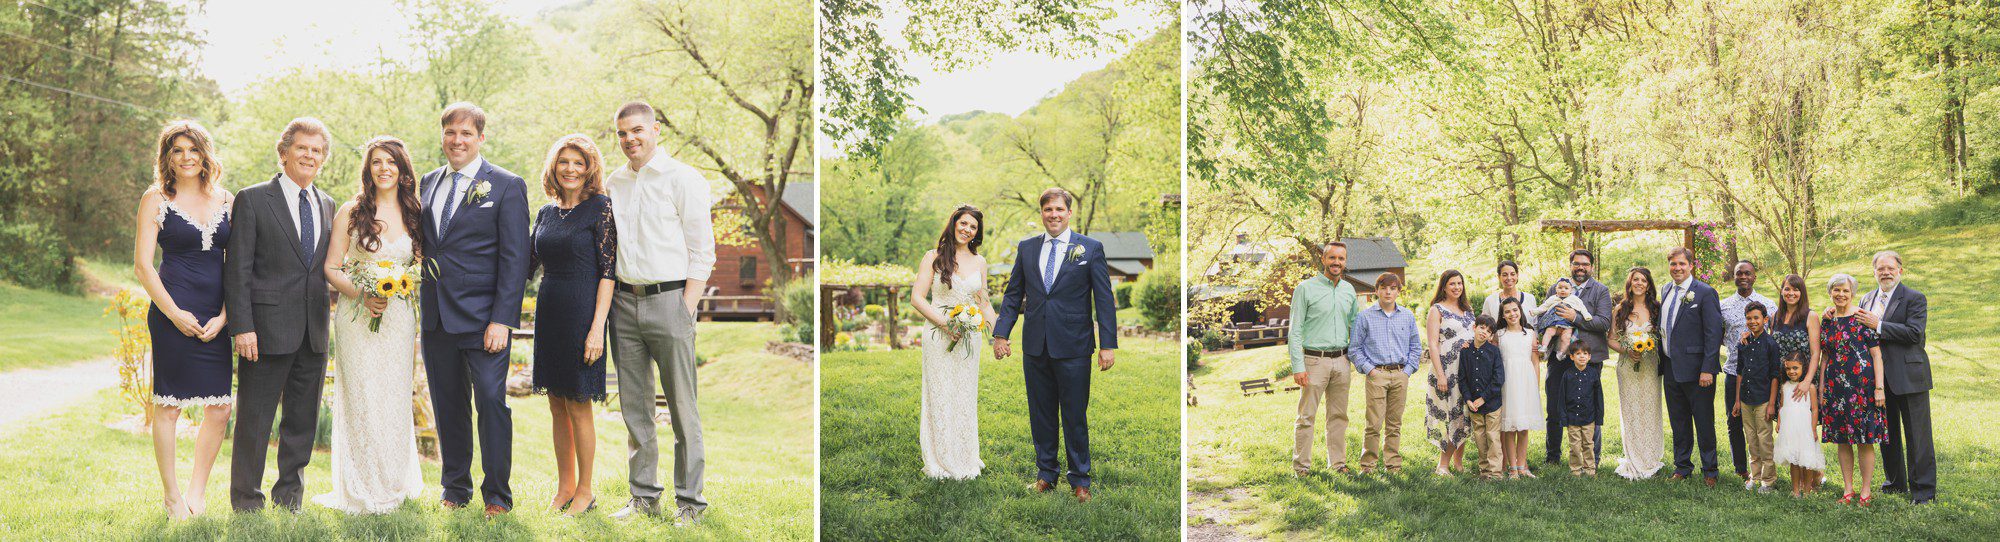 Family photos in garden after elopement wedding ceremony at Butterfly Hollow in Gordonsville, TN. Photos by Krista Lee Photography. 